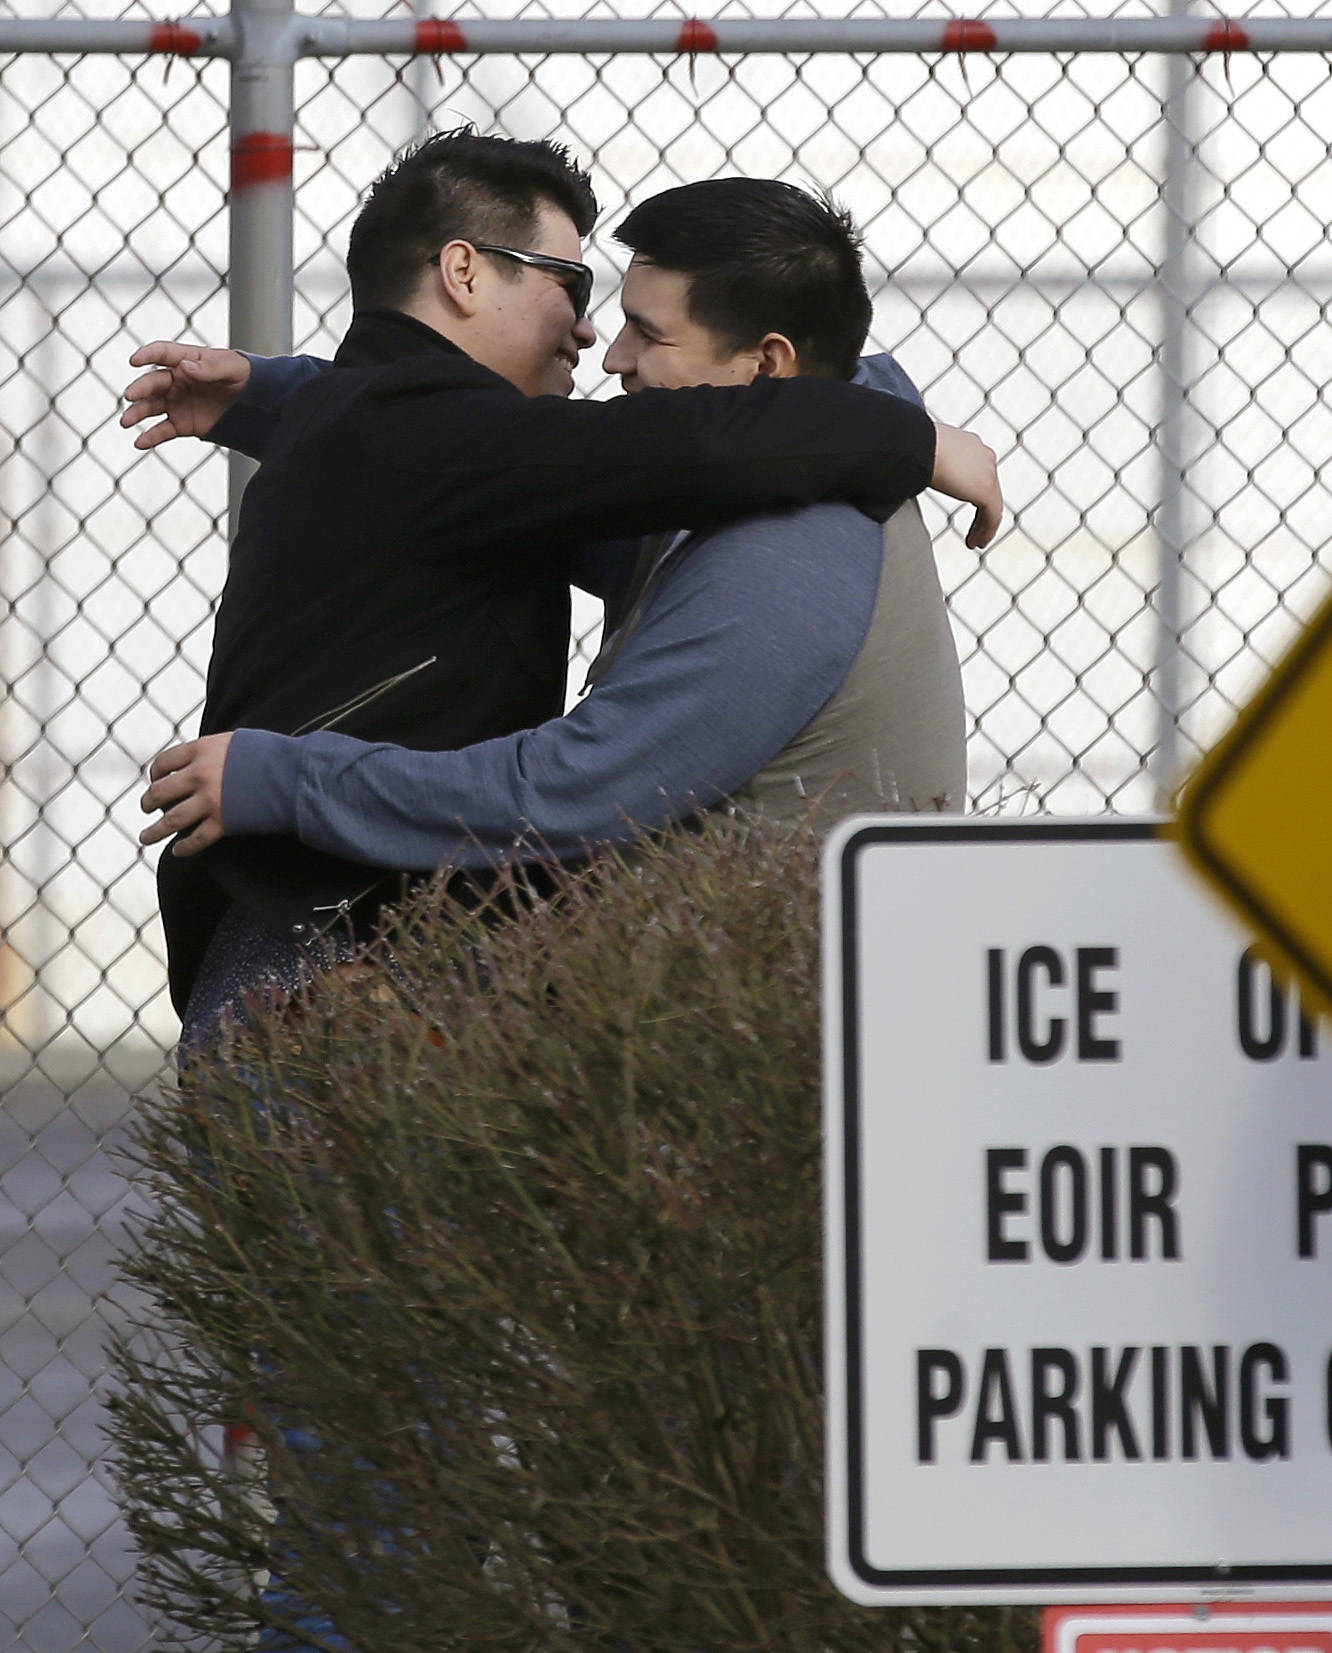 Daniel Ramirez Medina, right, hugs his brother, left, who has not been identified by name, after Ramirez walked out of the Northwest Detention Center in Tacoma after Ramirez was released from federal custody Wednesday. (Ted S. Warren/The Associated Press)